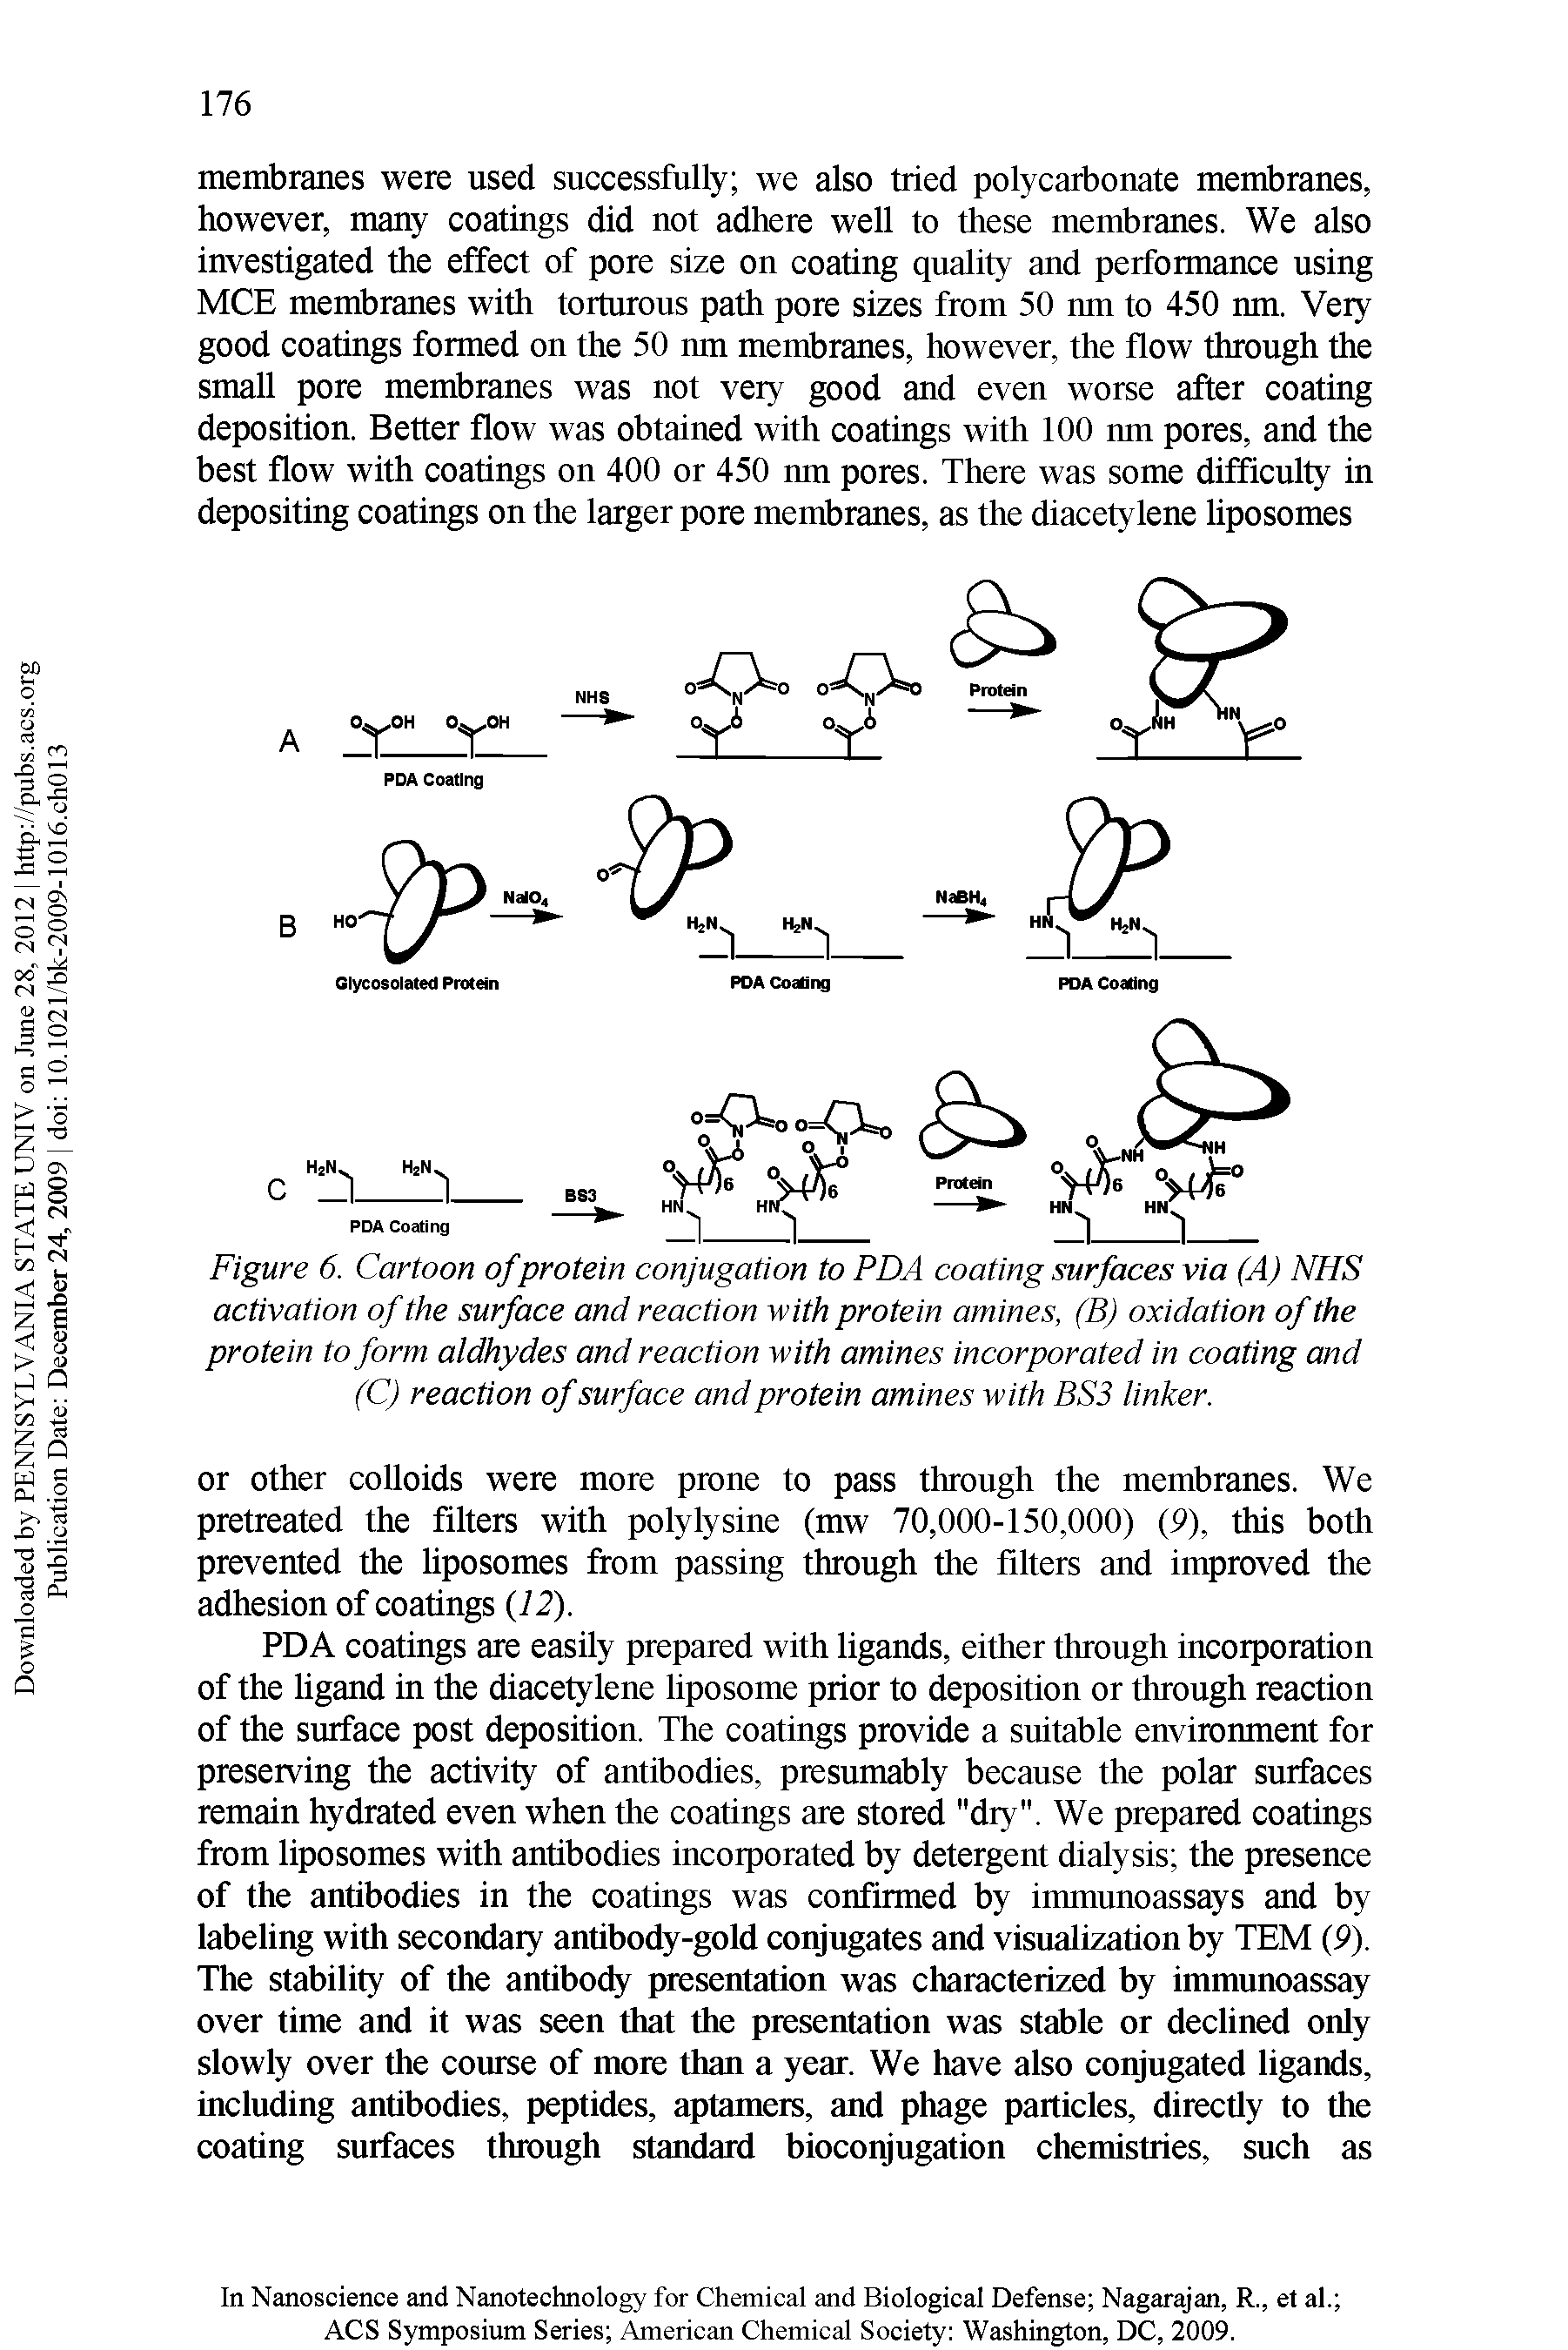 Figure 6. Cartoon of protein conjugation to PDA coating surfaces via (A) NHS activation of the surface and reaction with protein amines, (B) oxidation of the protein to form aldhydes and reaction with amines incorporated in coating and (C) reaction of surface and protein amines with BS3 linker.